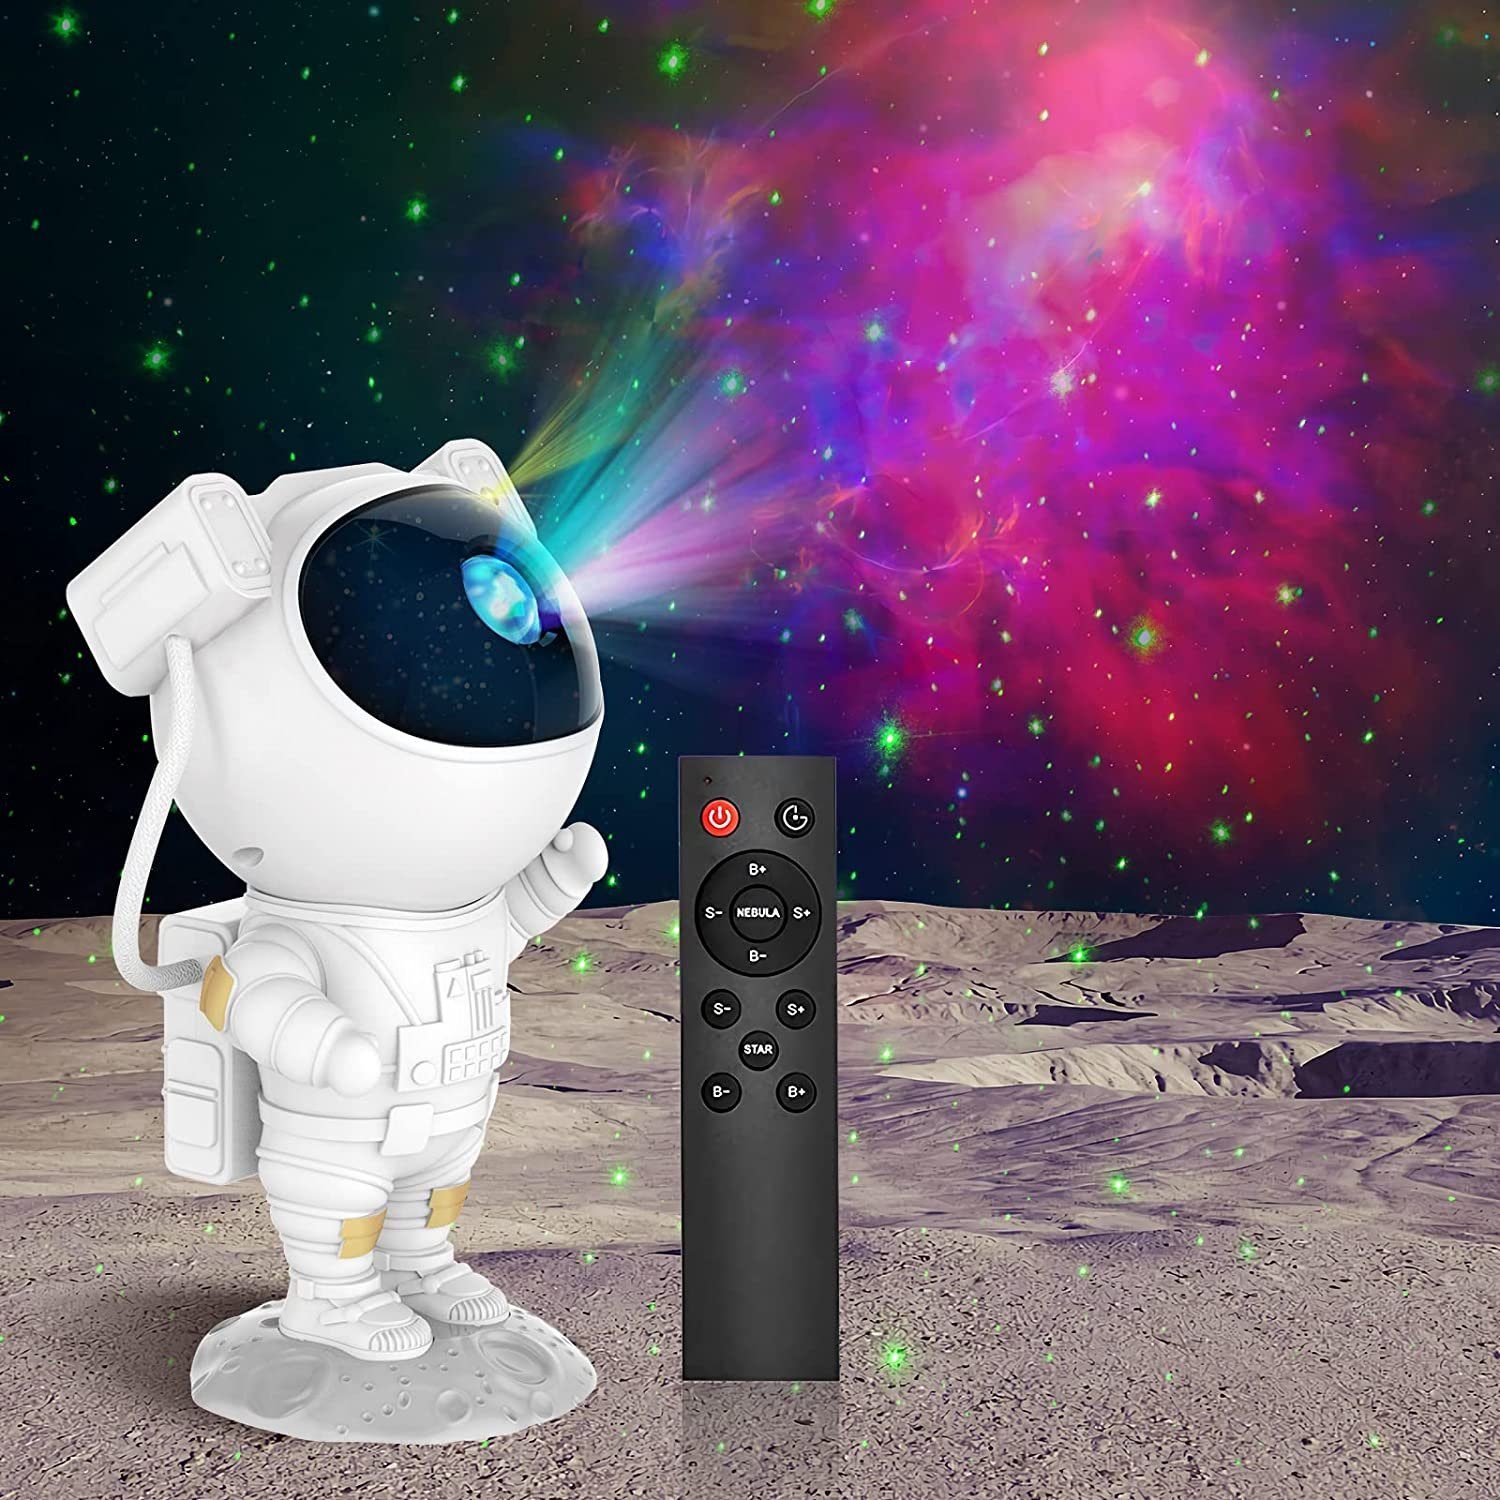 Astronaut Sternenhimmel Galaxy Projector, LED